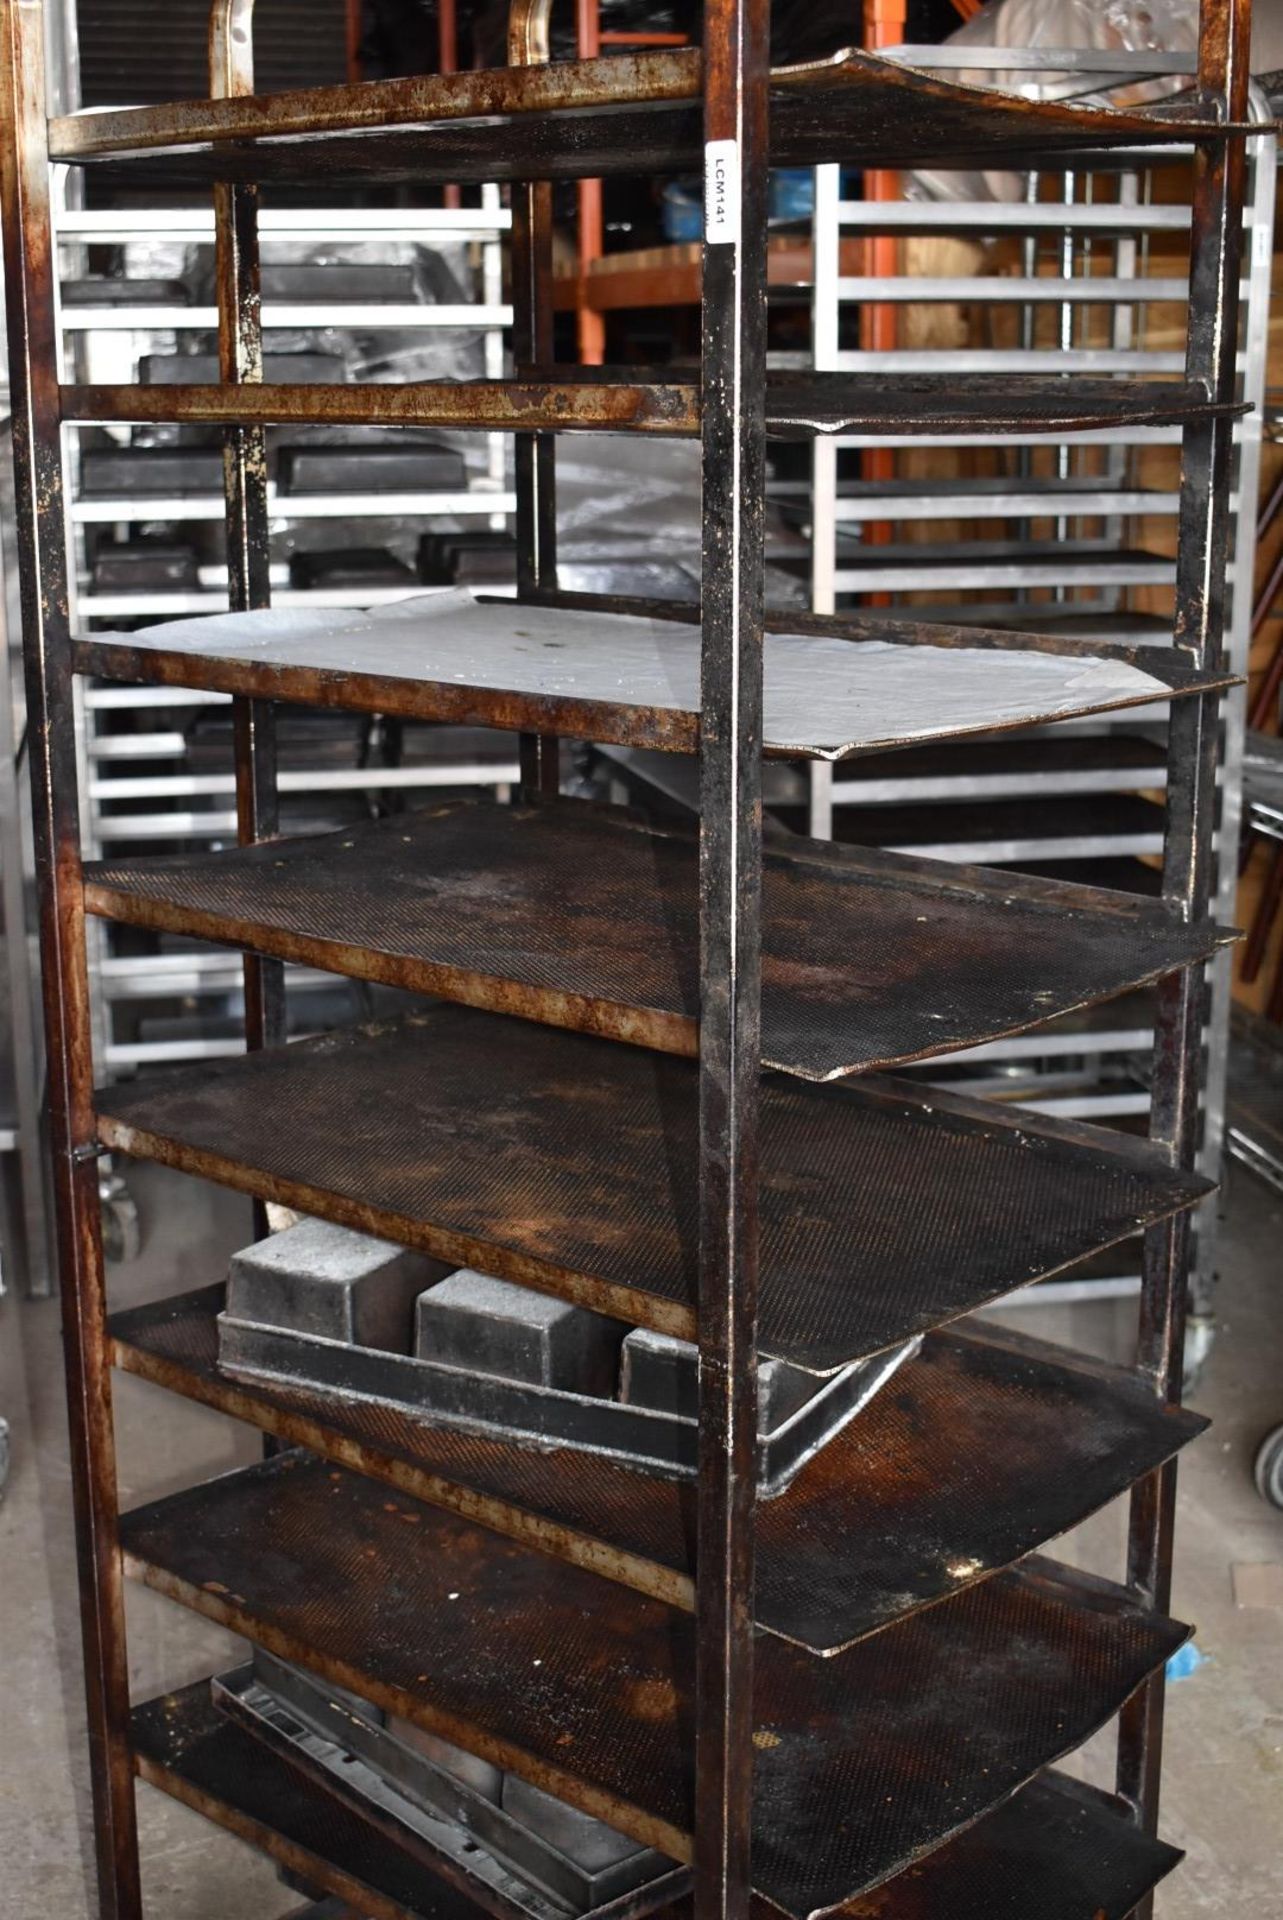 1 x Bakers Mobile Tray Rack With Approx 8 x Perforated Baking Trays - Stainless Steel With Castors - - Image 3 of 6